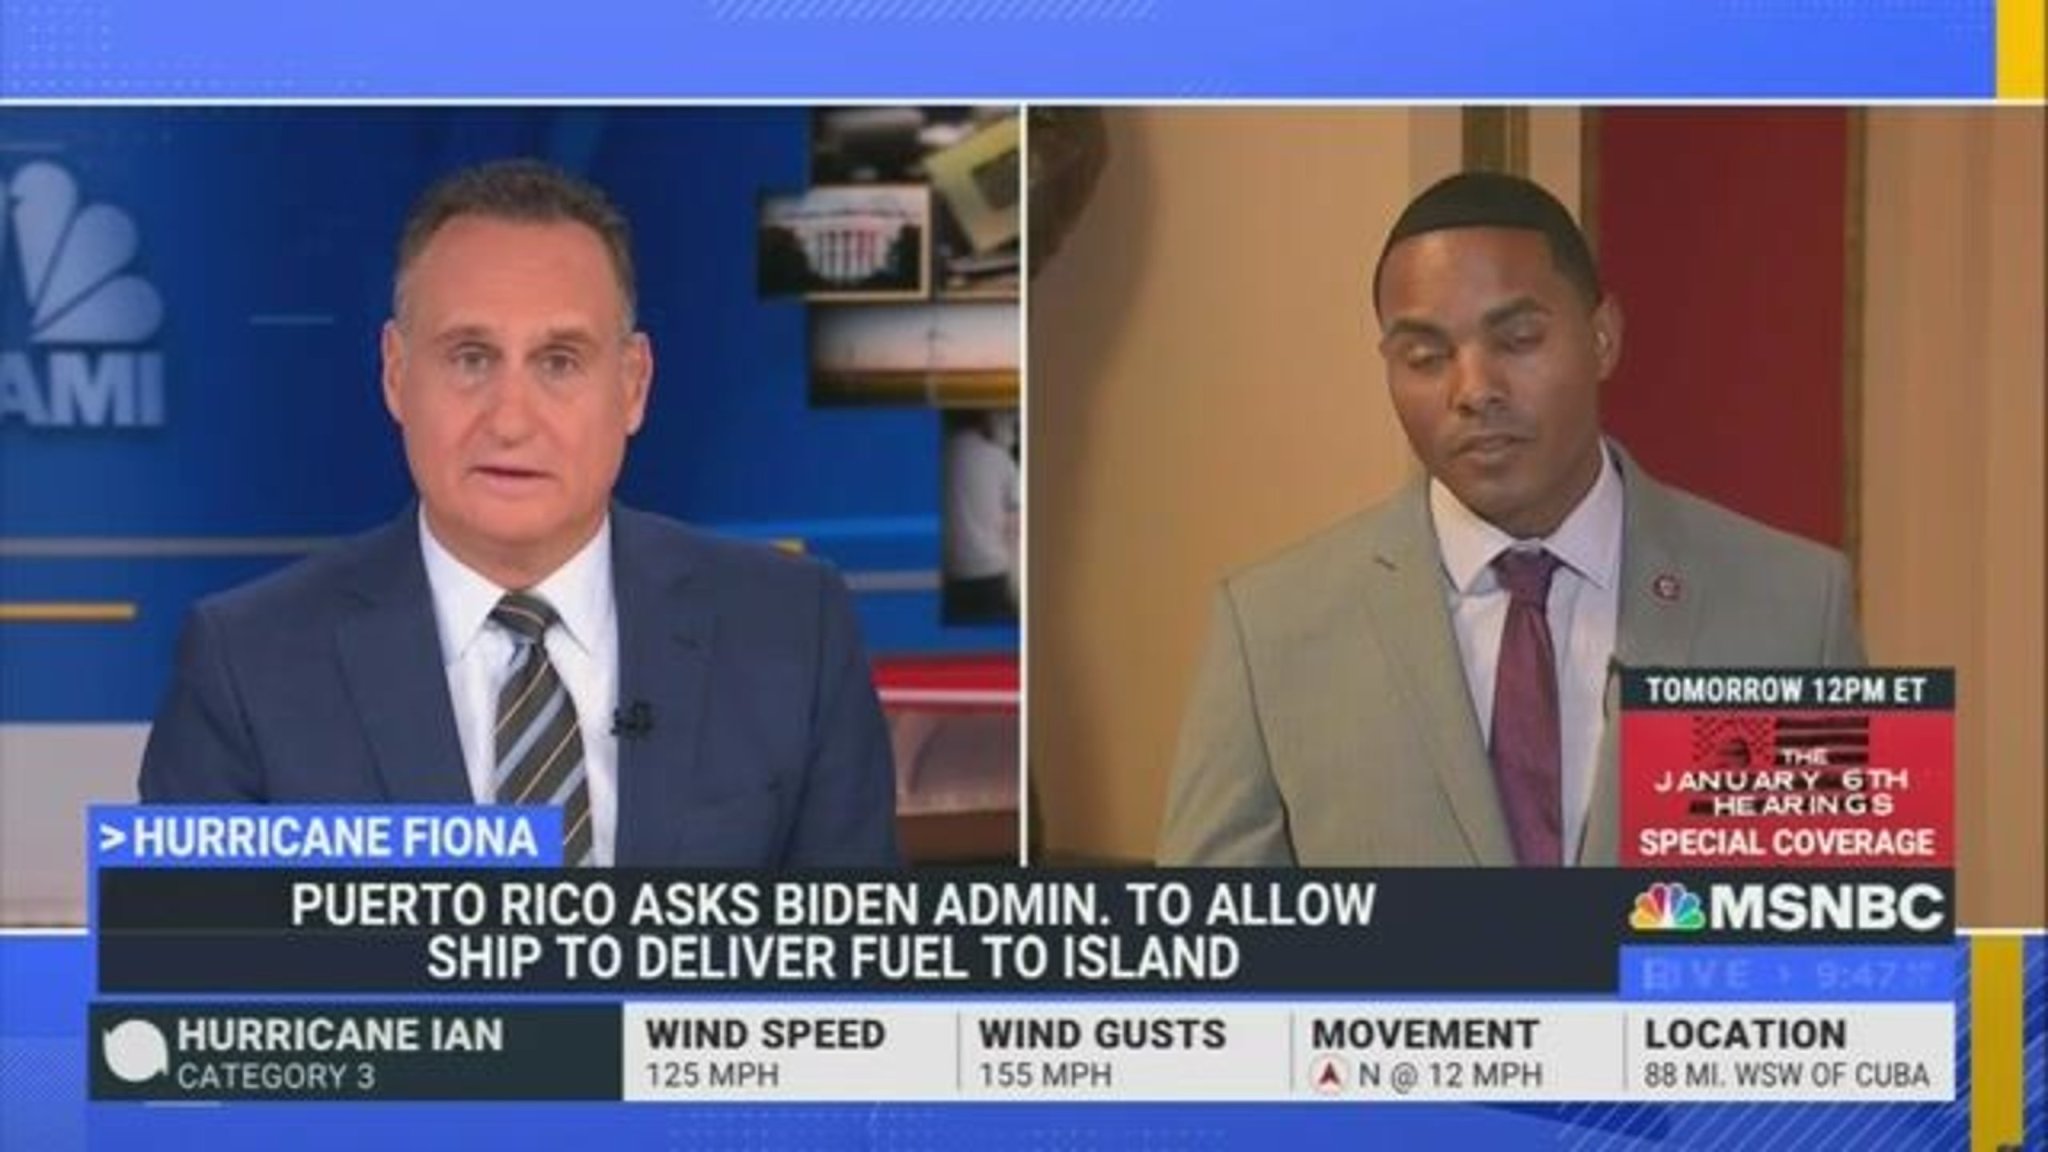 Rep. Richie Torres (D-NY) calls on the Biden administration to allow a foreign ship to deliver diesel to Puerto Rico.